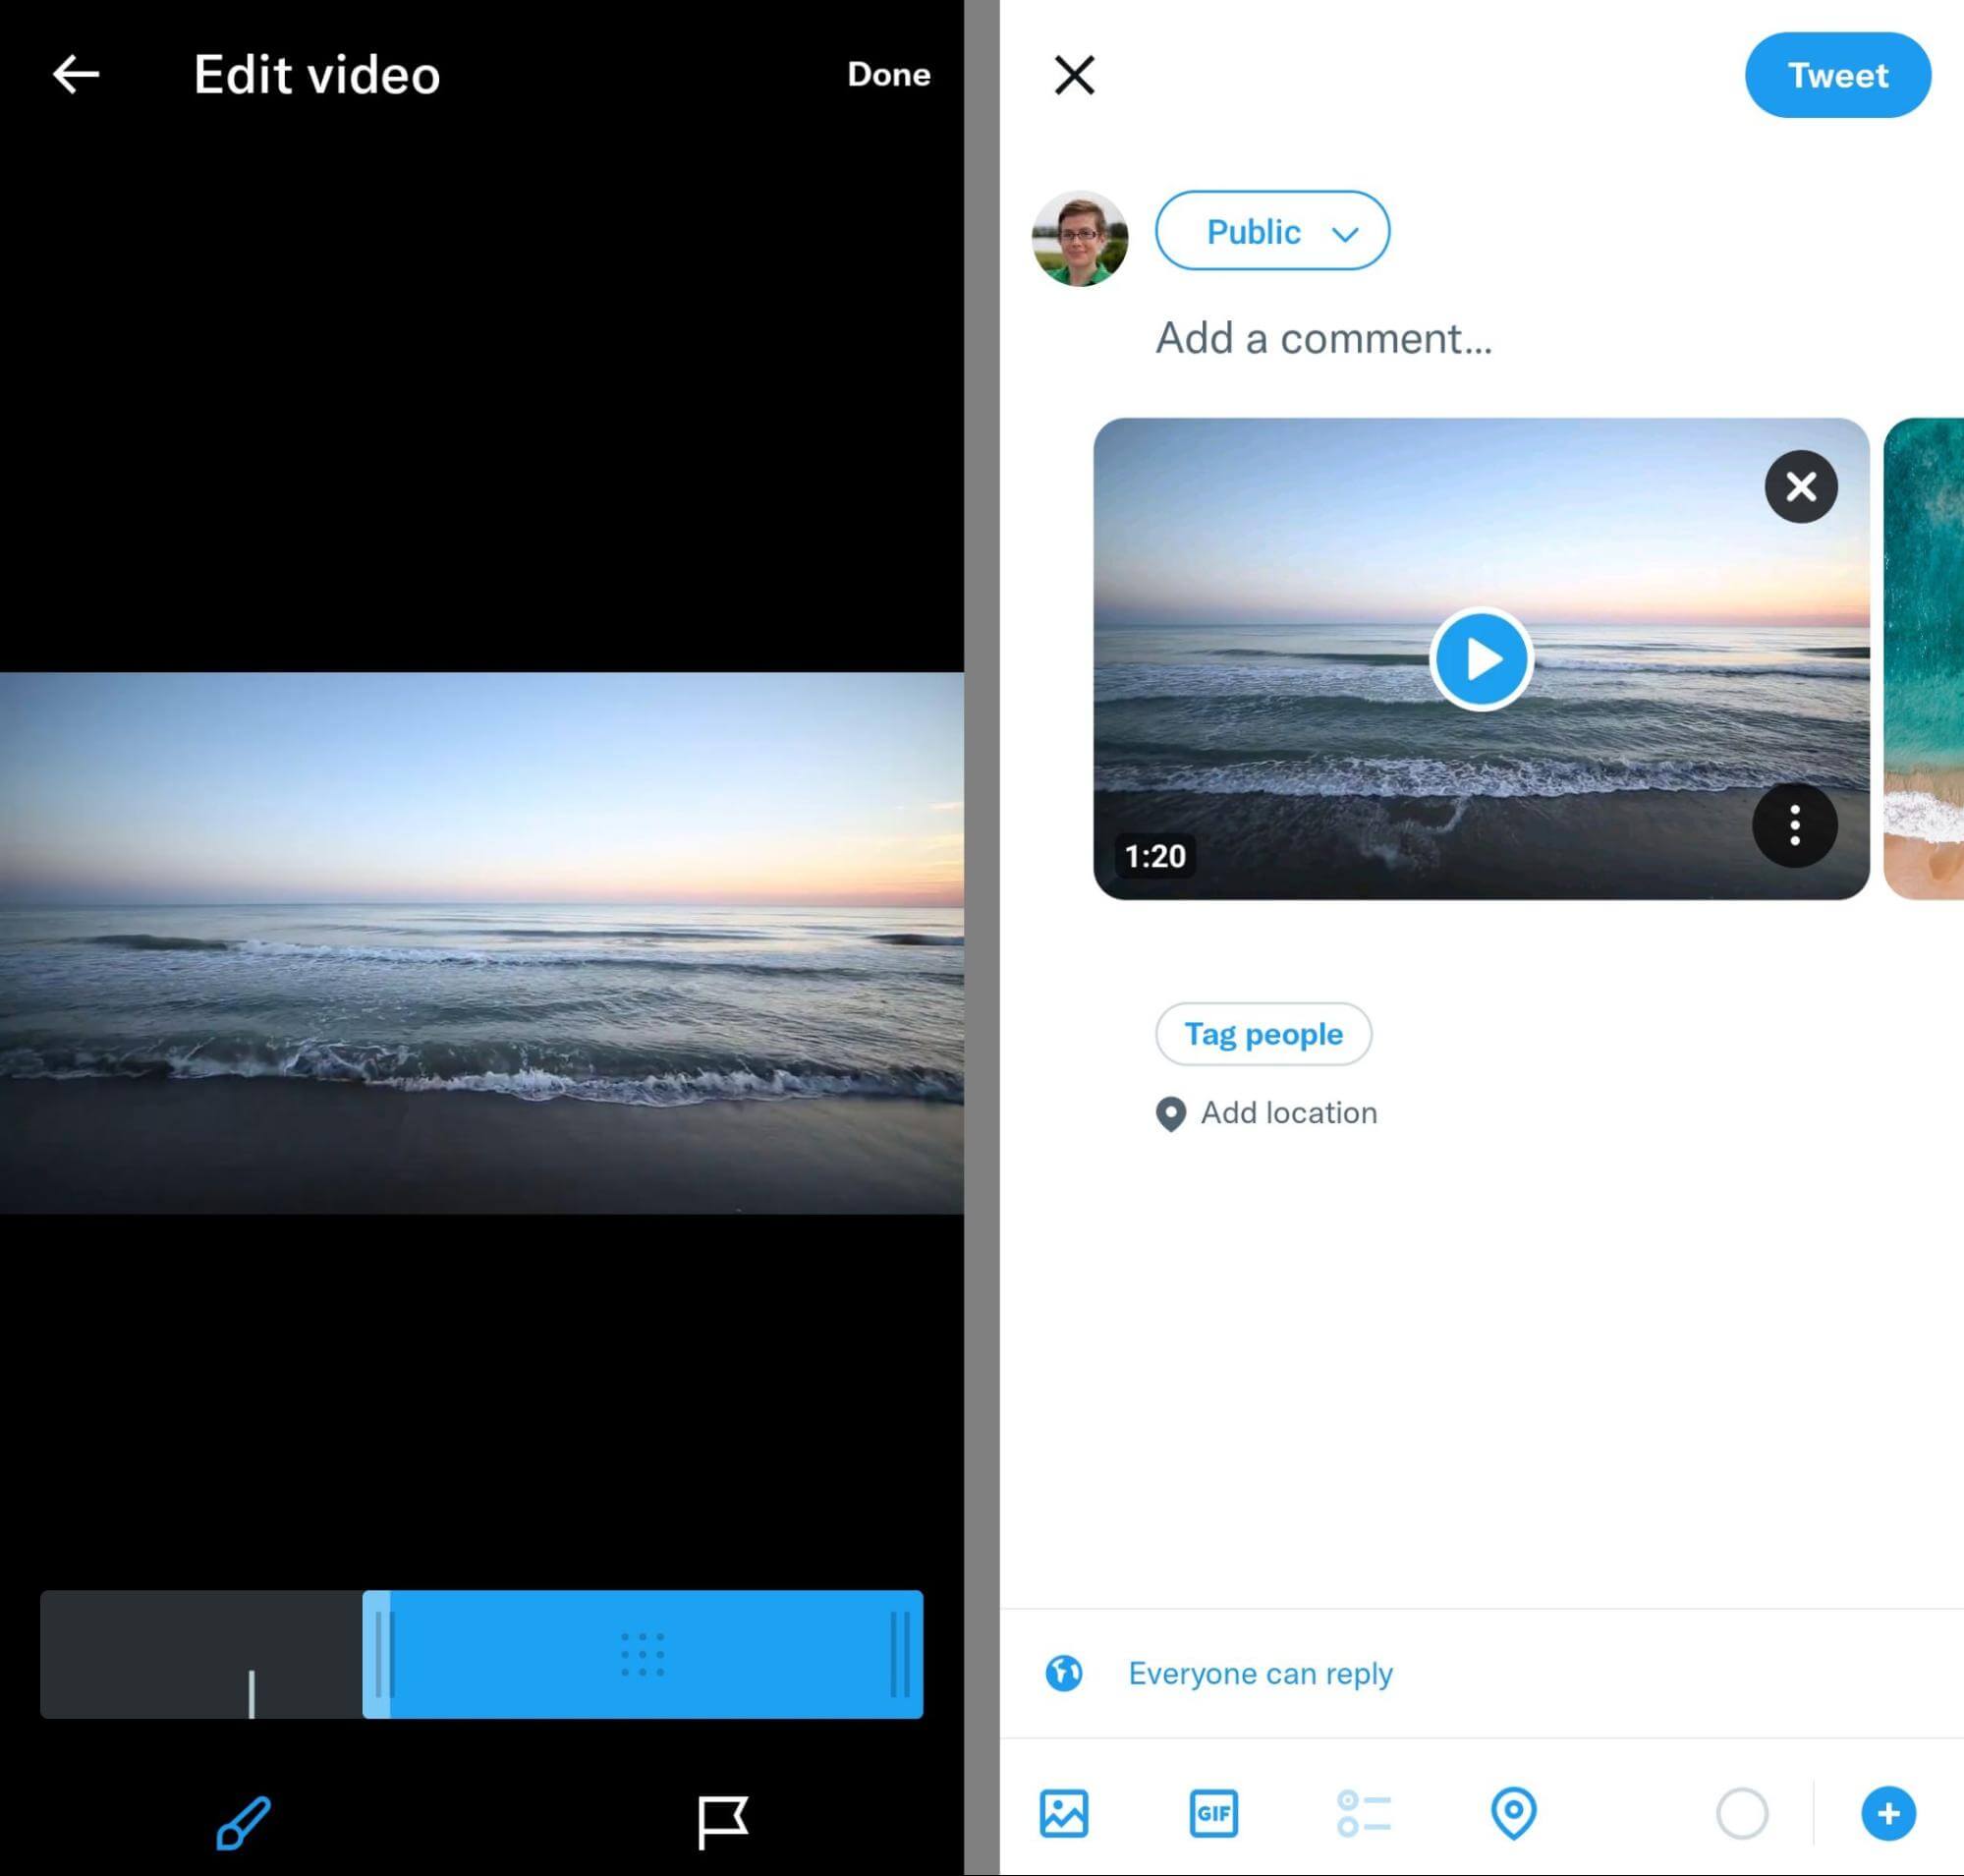 repurpose-long-form-videos-on-social-media-feature-in-carousels-15